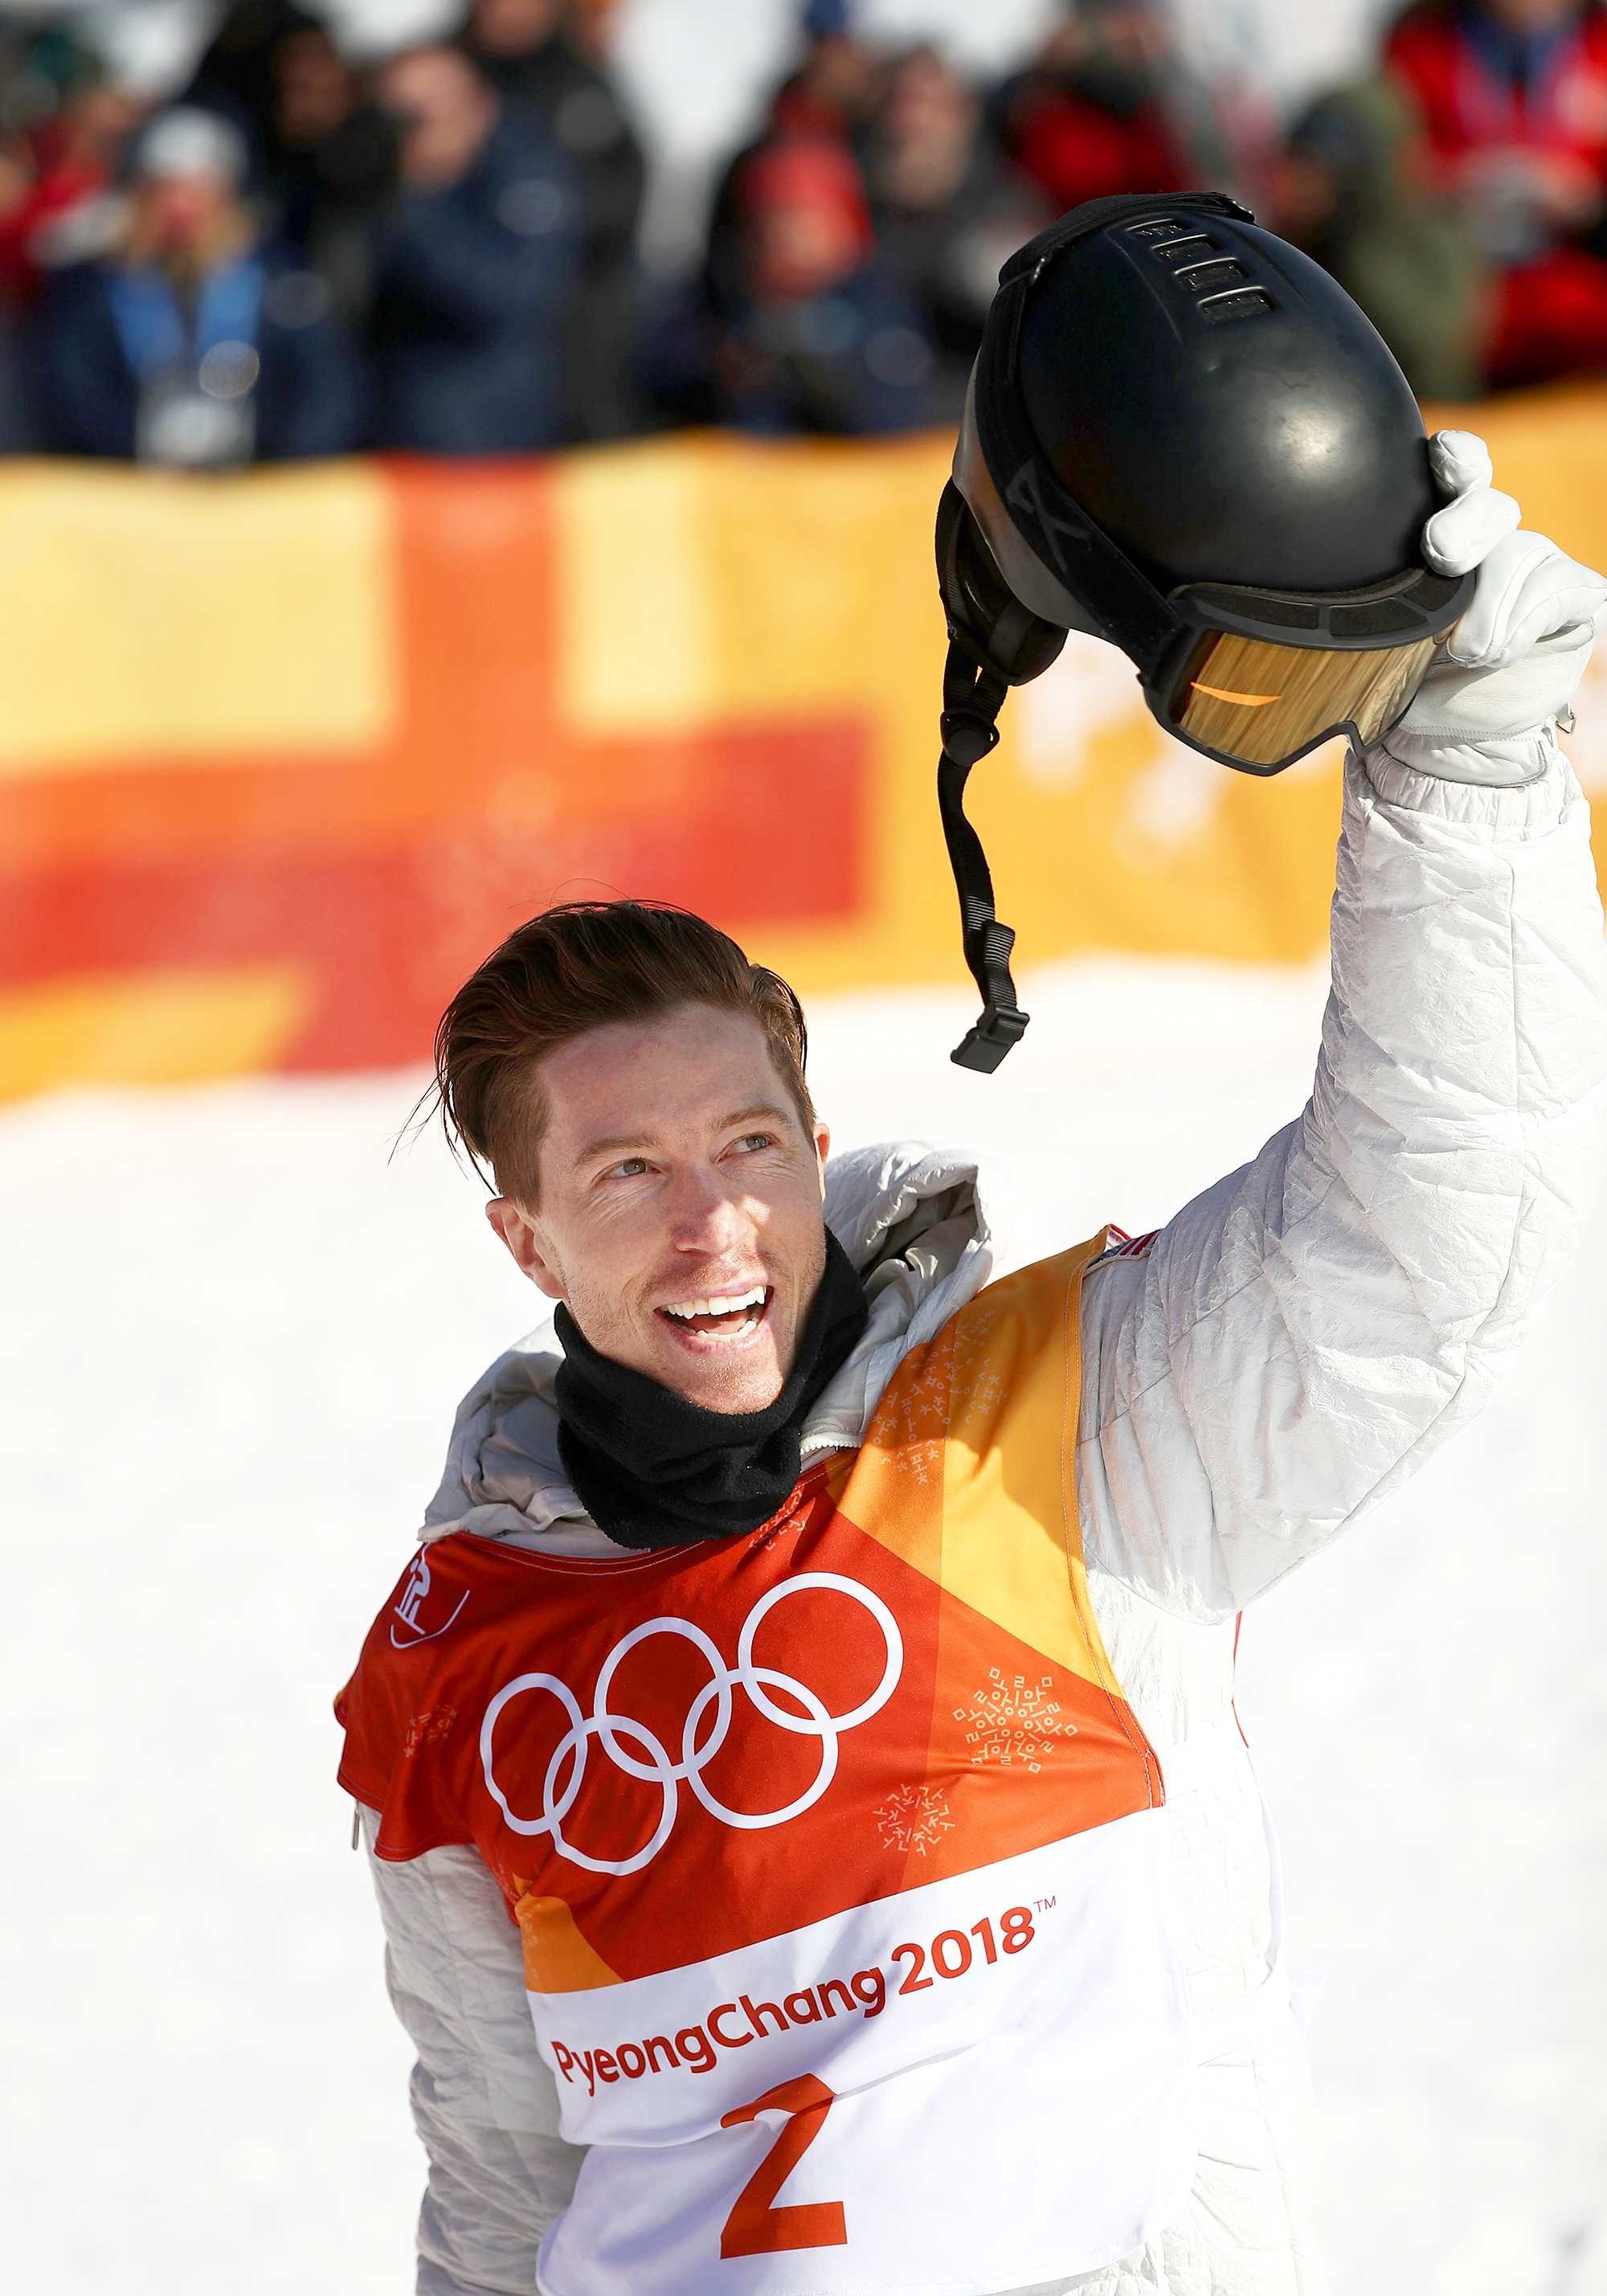 Shaun White in halfpipe final: When, how you can watch him at Olympics